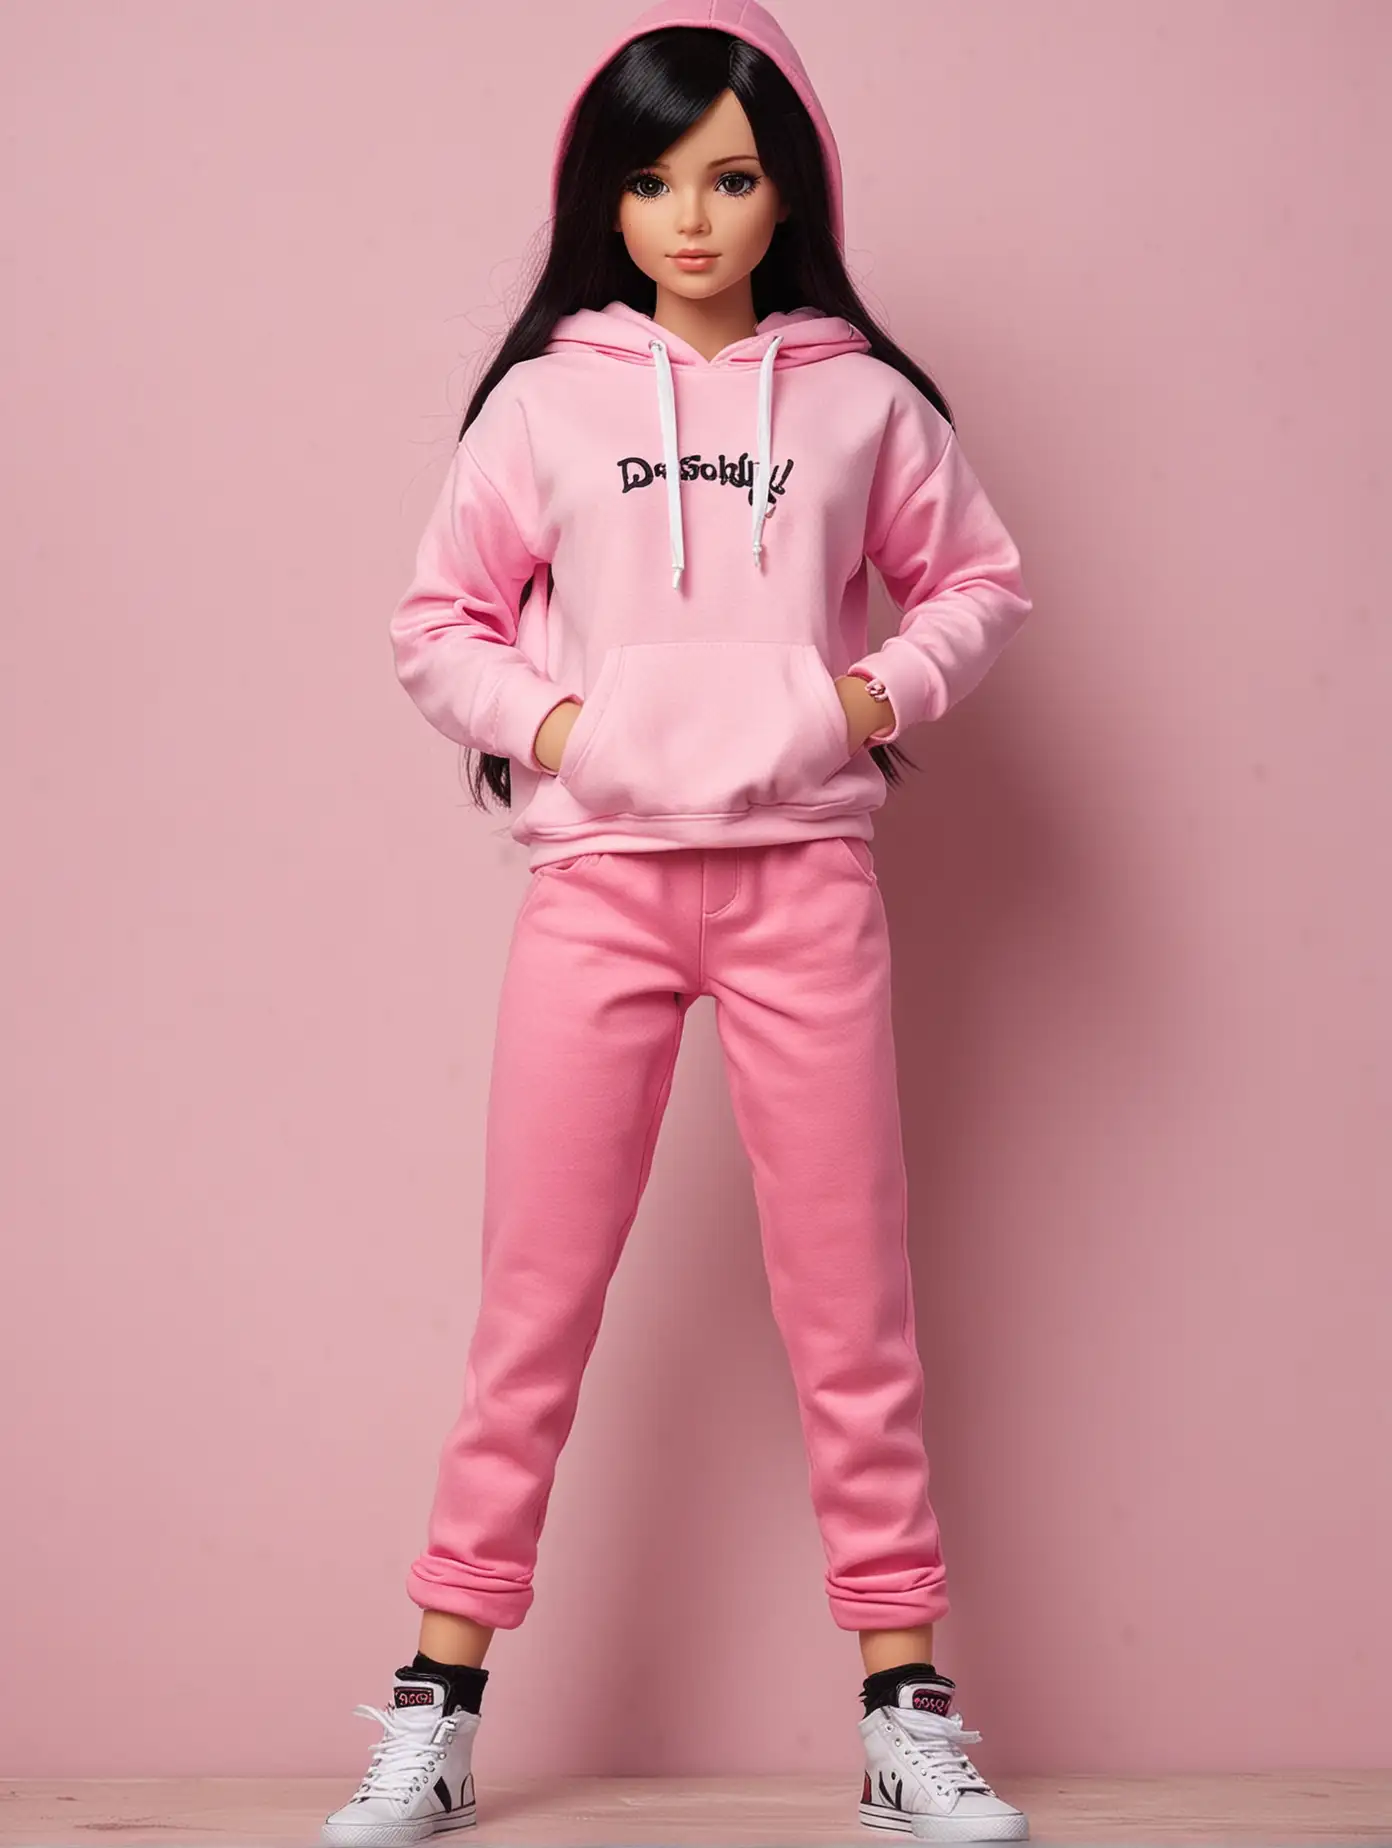 Stylish Teenage Doll with Pink Hoodie and Accessories